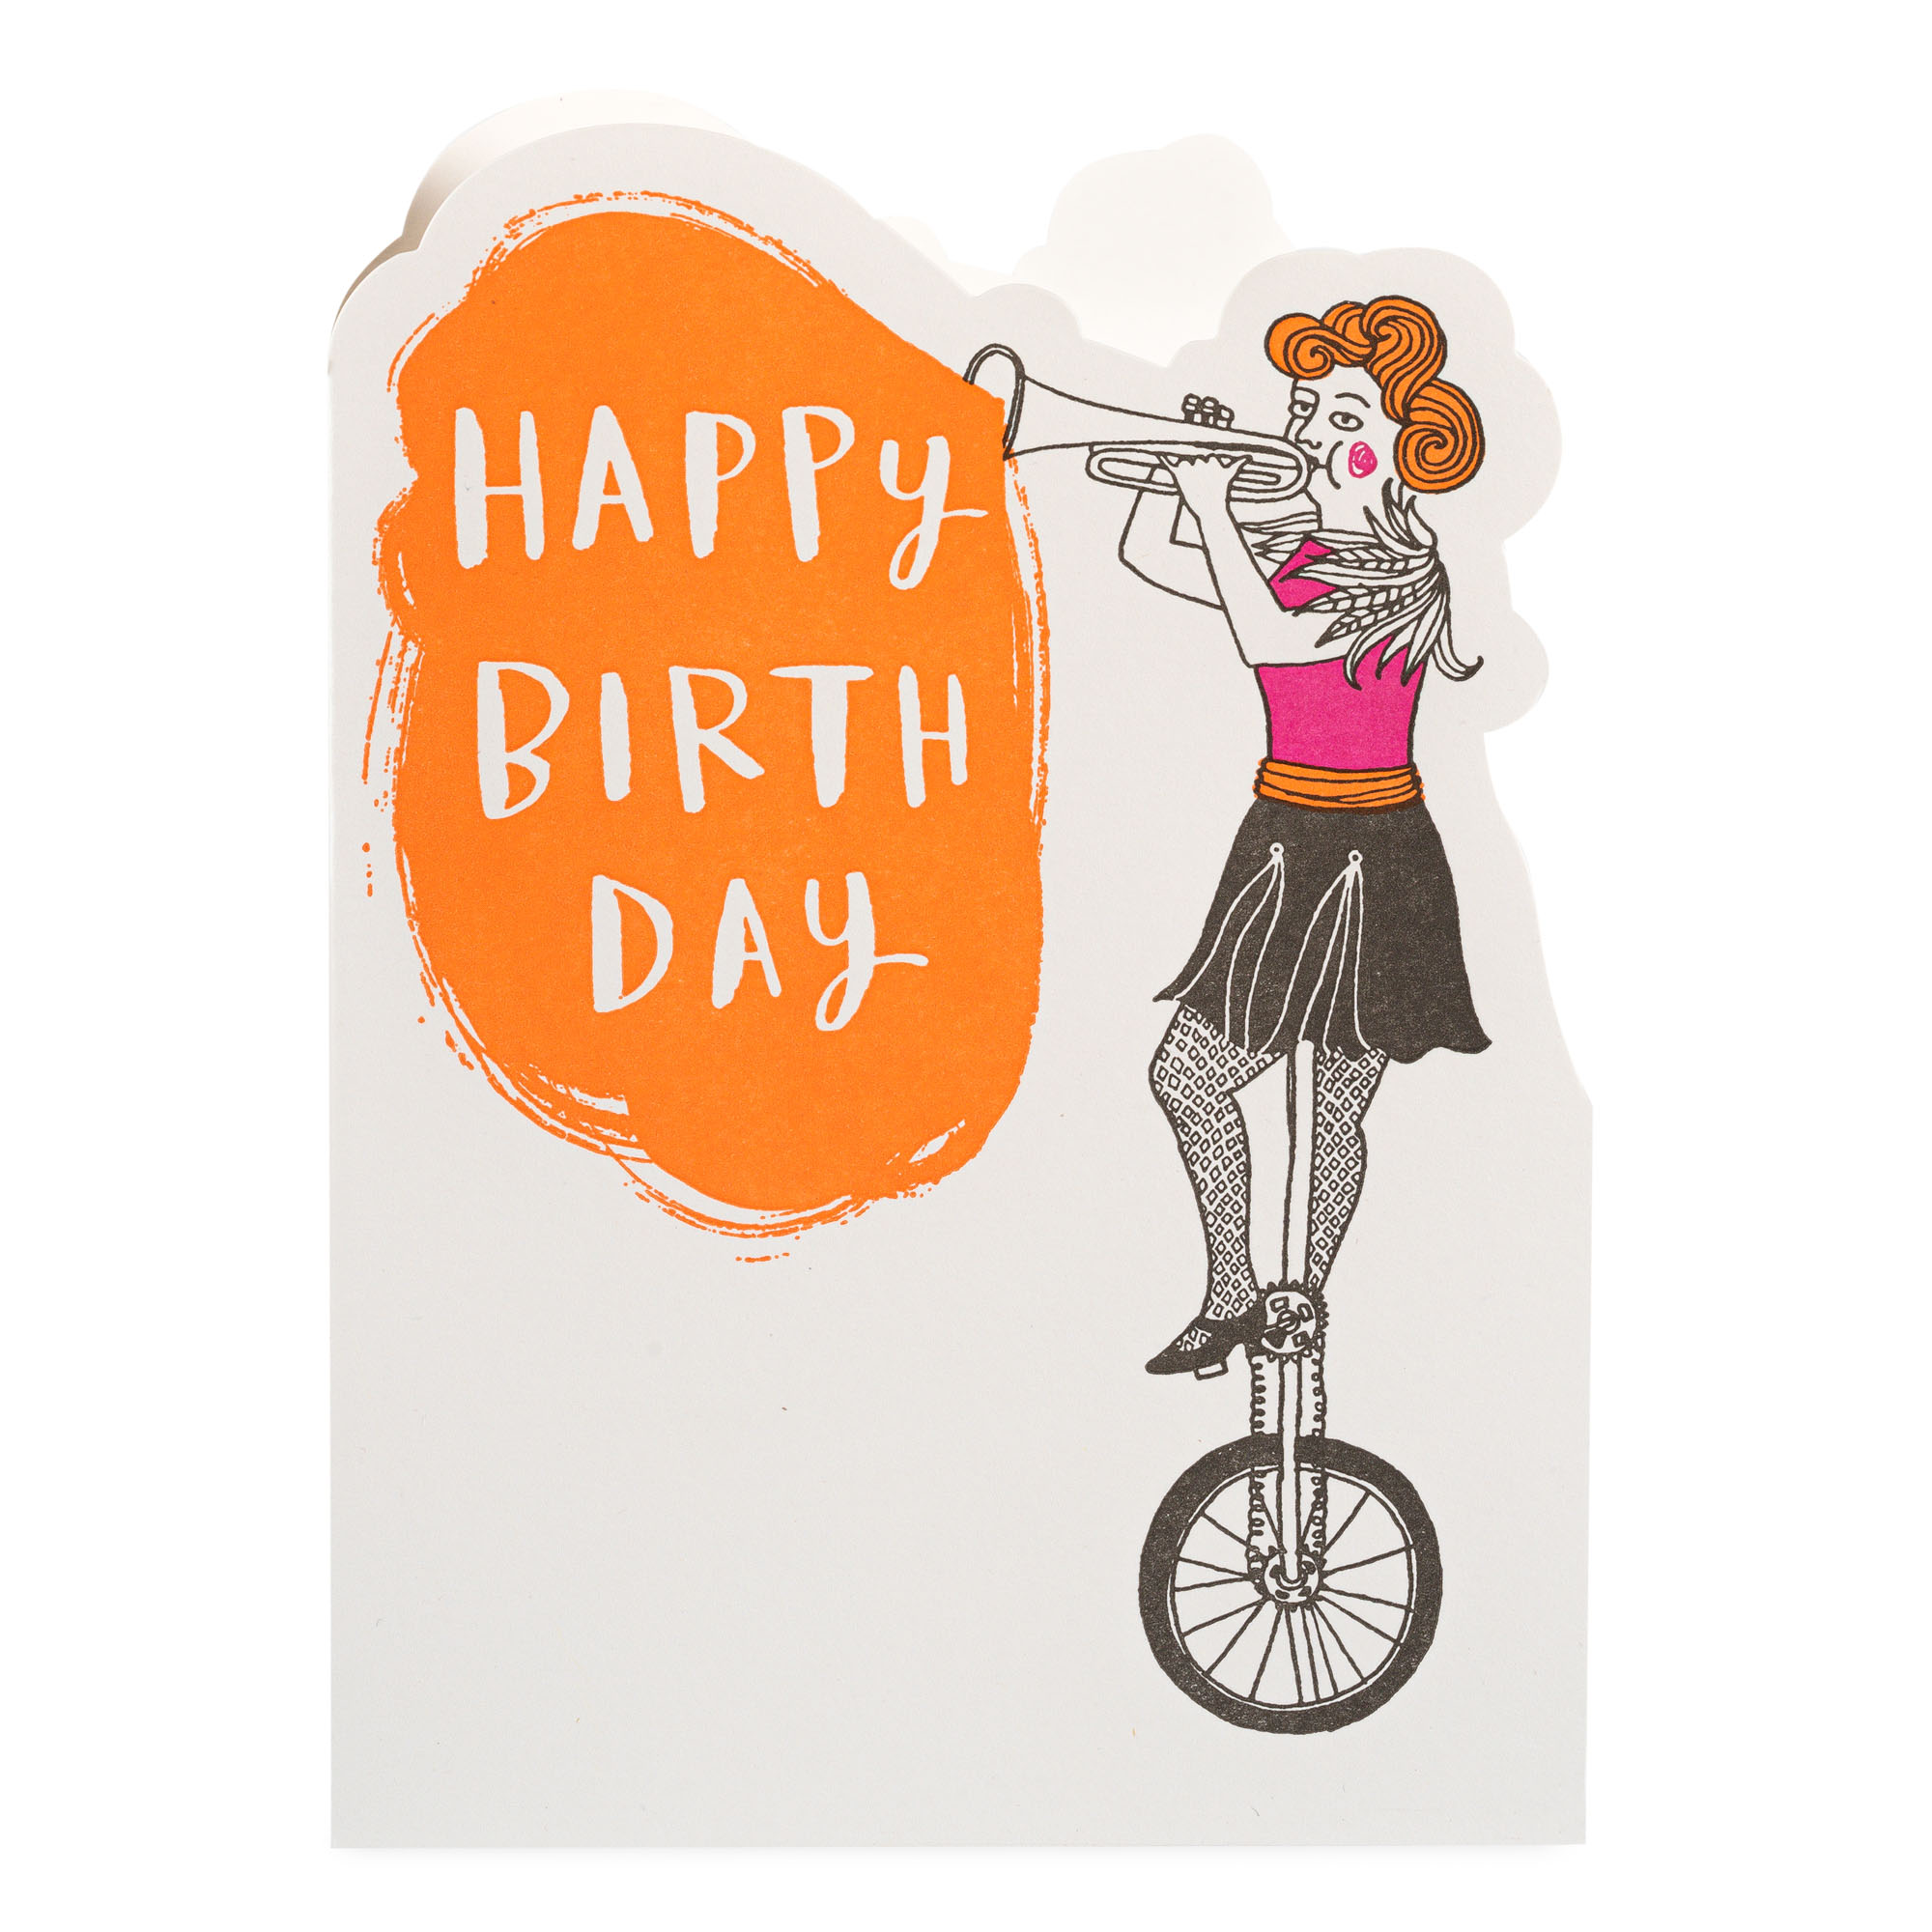 Happy Birthday Trumpeter - Cut-out Cards - Charlotte Farmer - from Archivist Gallery 